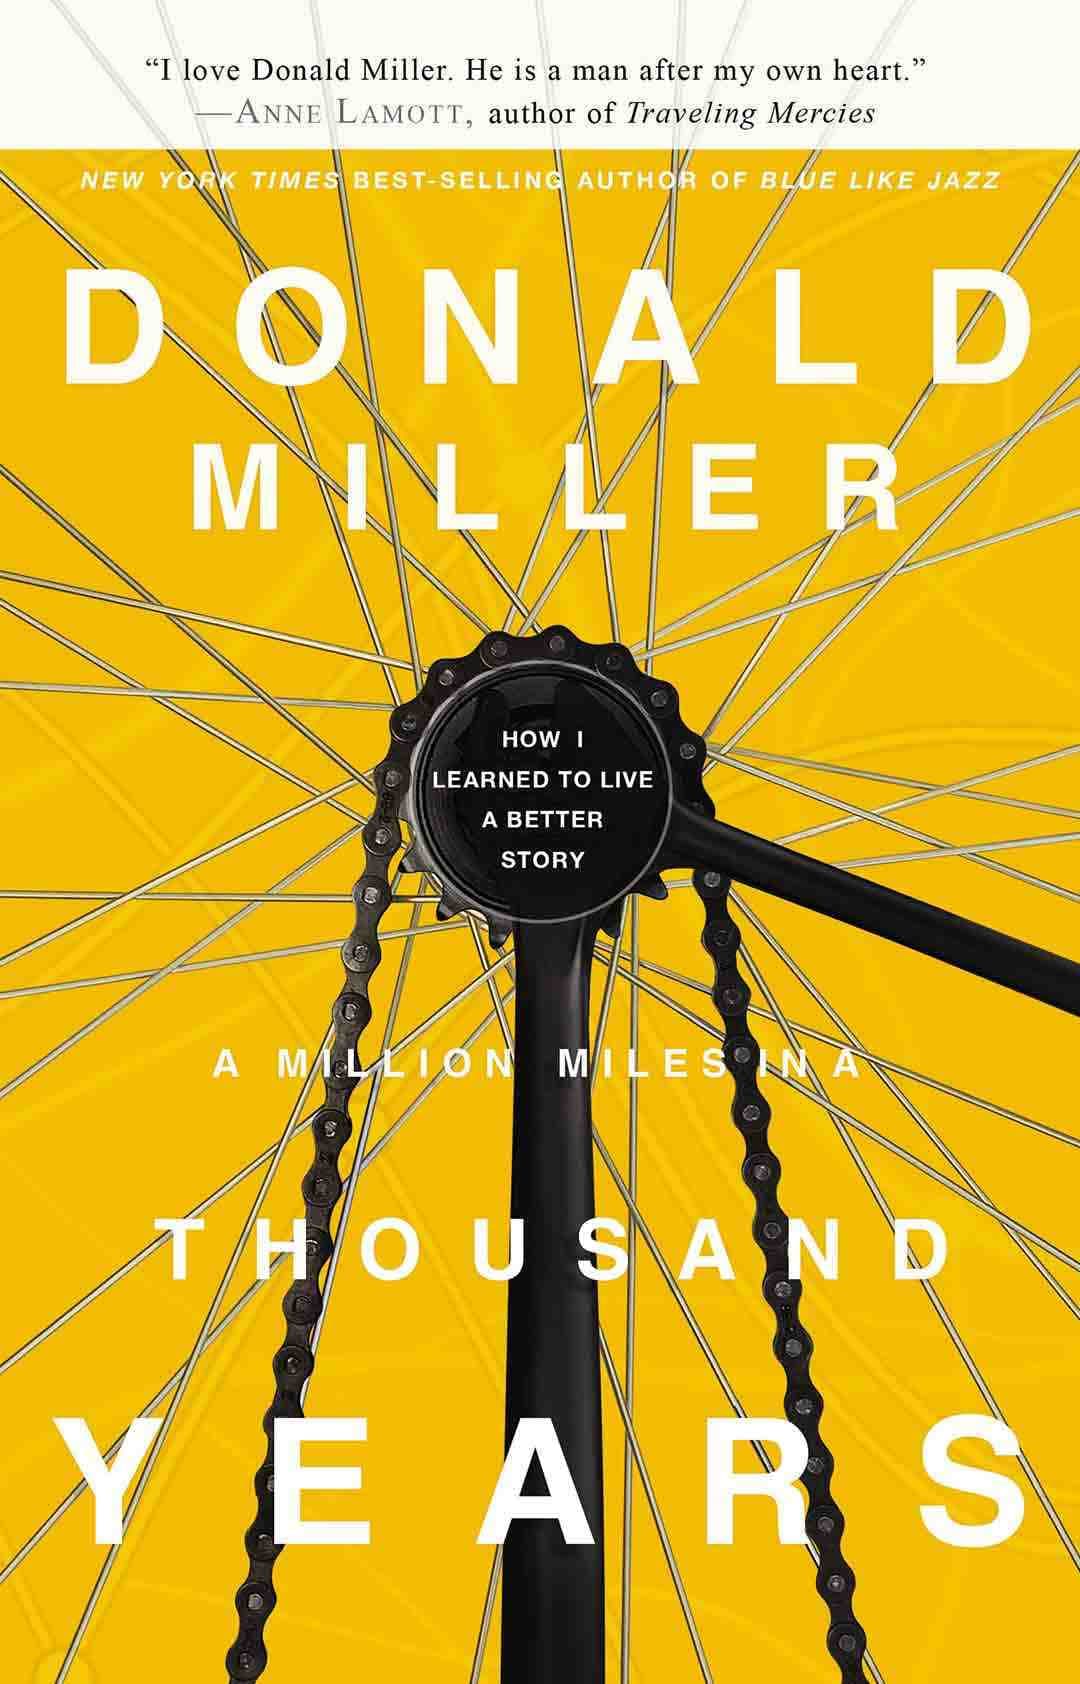 “A Million Miles in a Thousand Years” by Donald Miller book cover